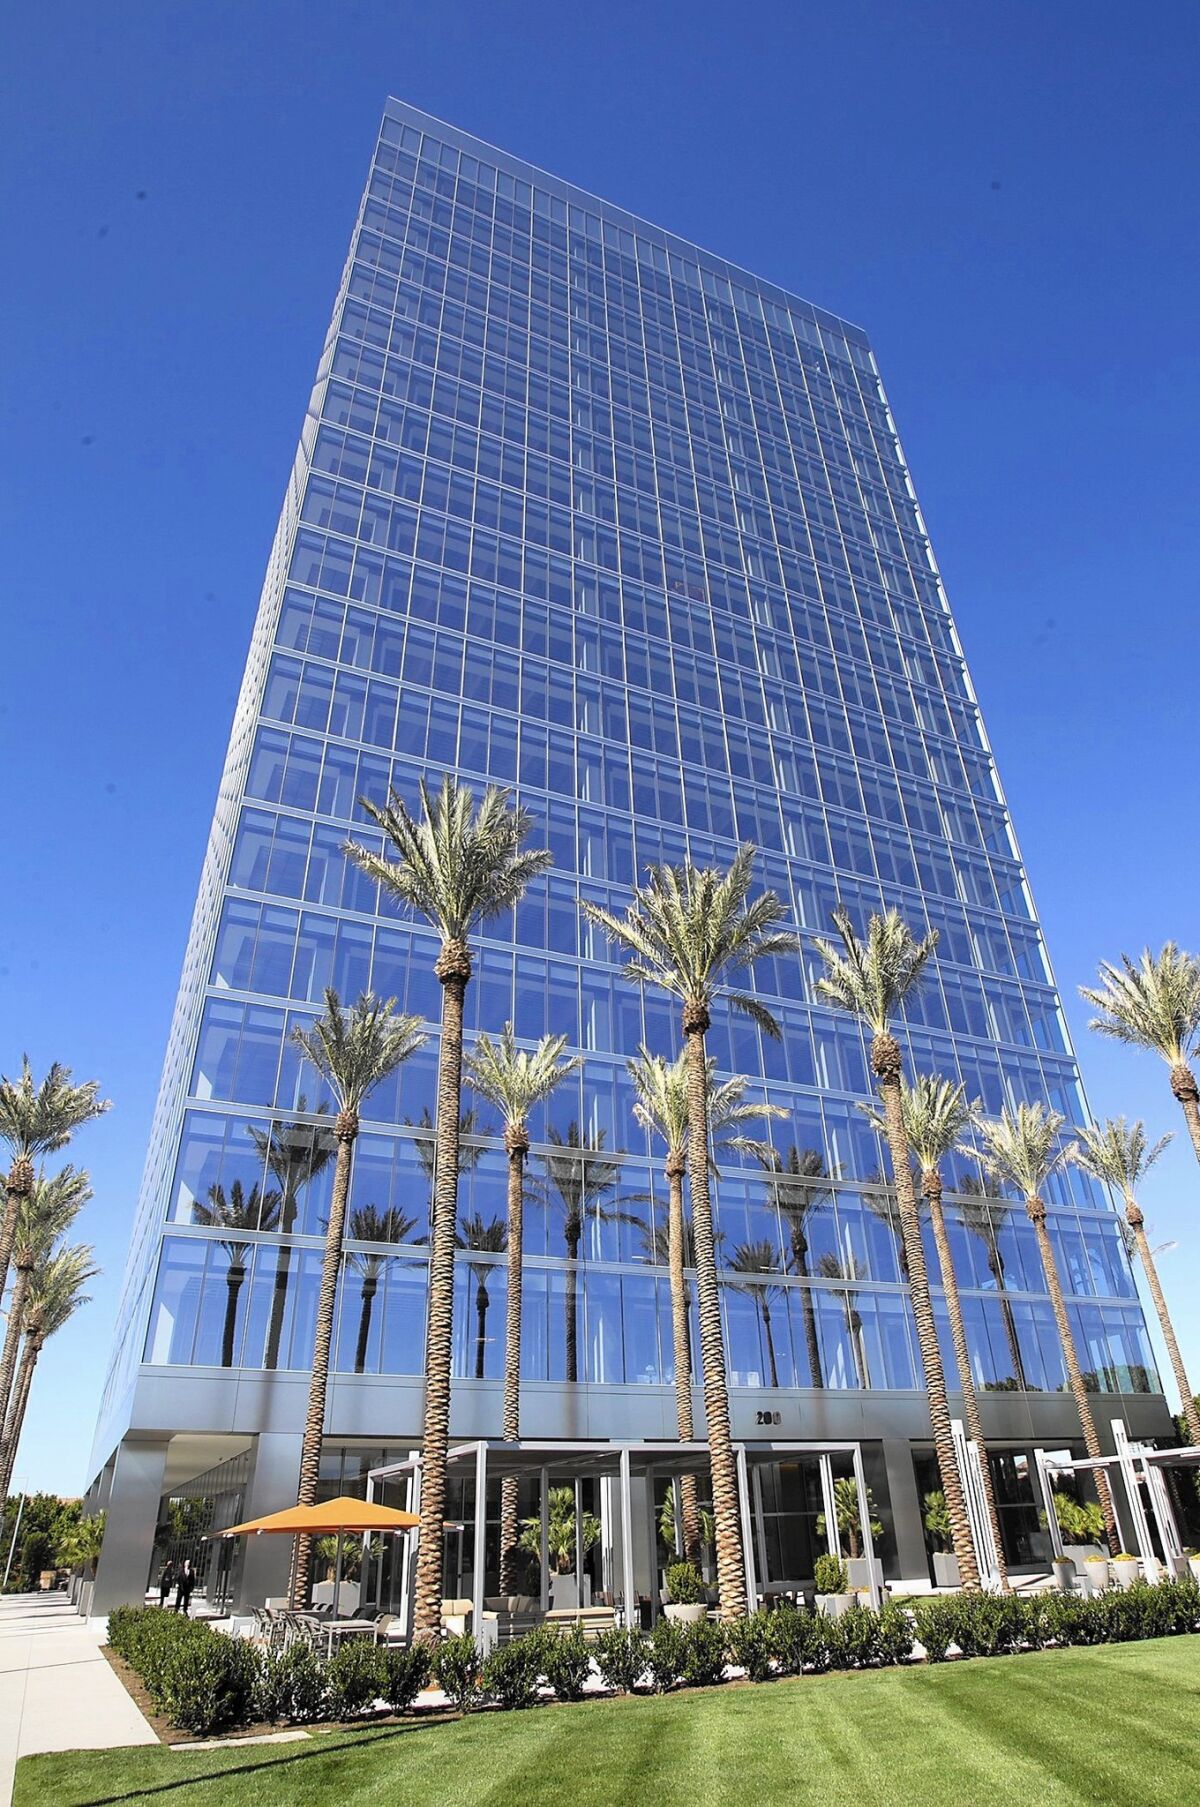 The new 21-story 200 Spectrum Center building was recently completed. The building is the tallest office building in Orange County.